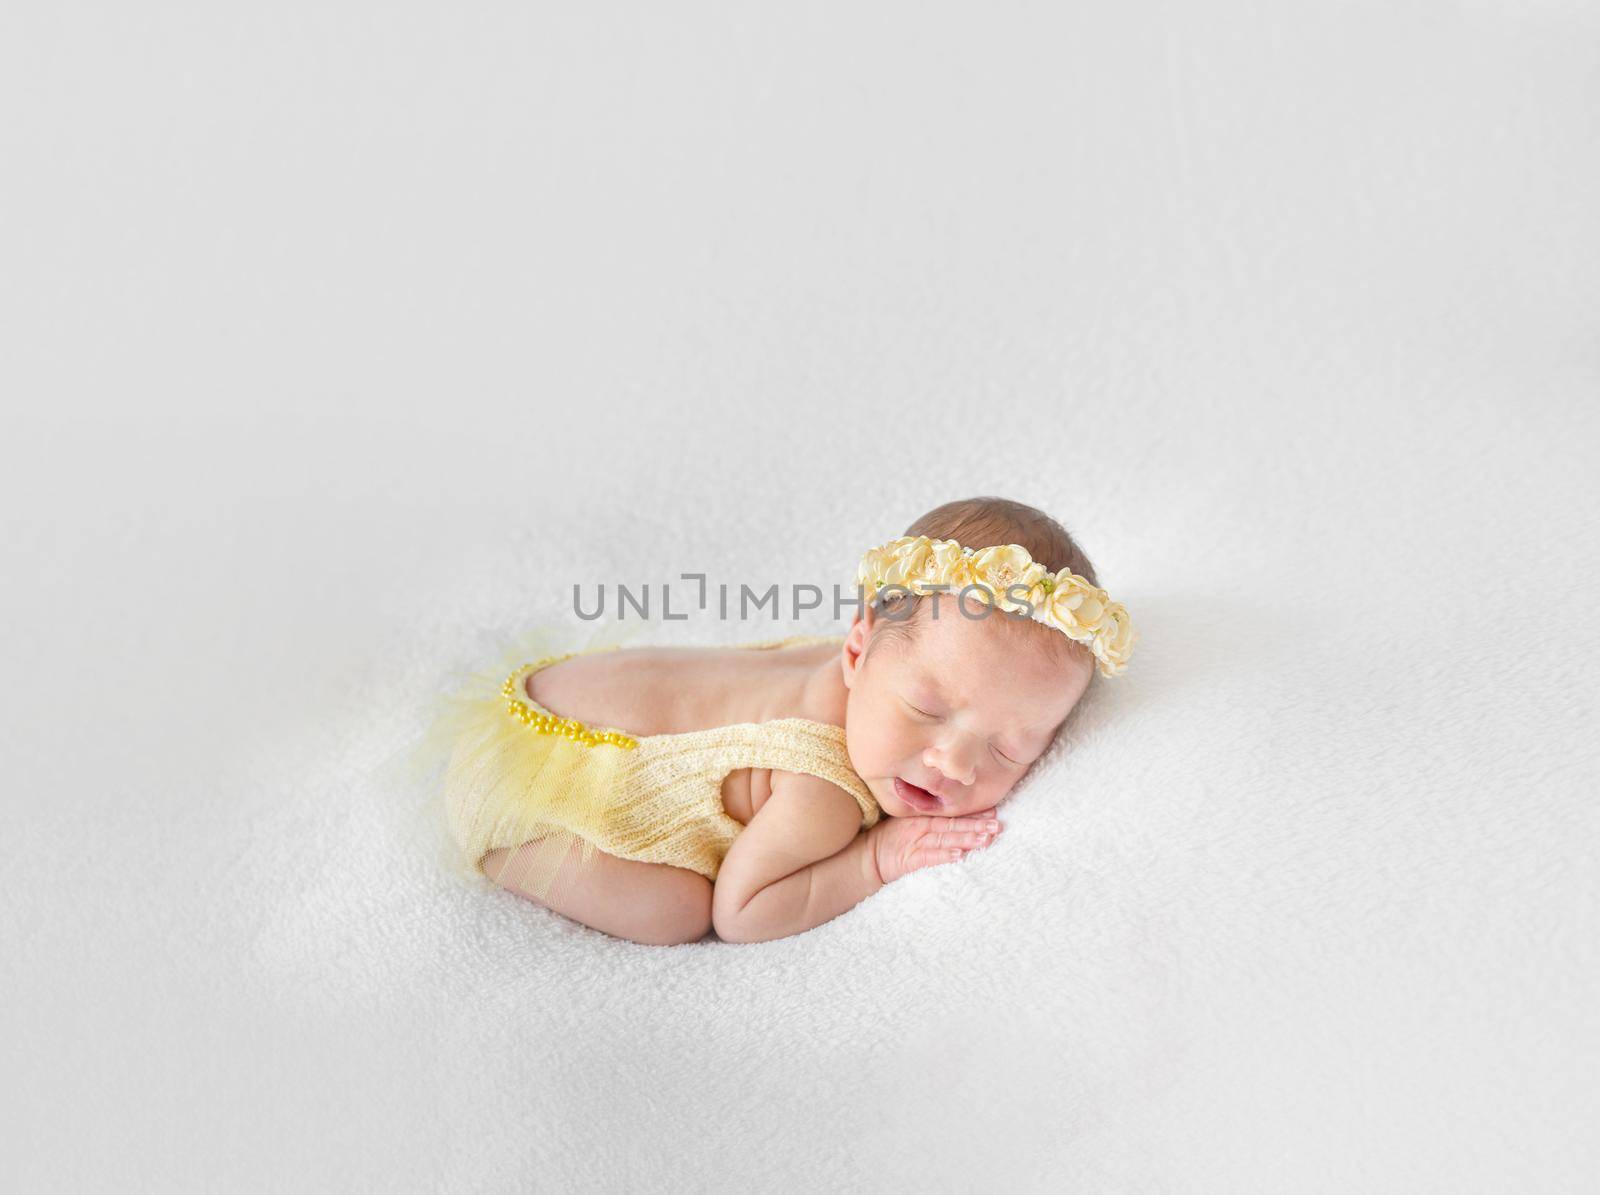 Amazing little kid in a yellow knitted costume napping on her tummy, closeup